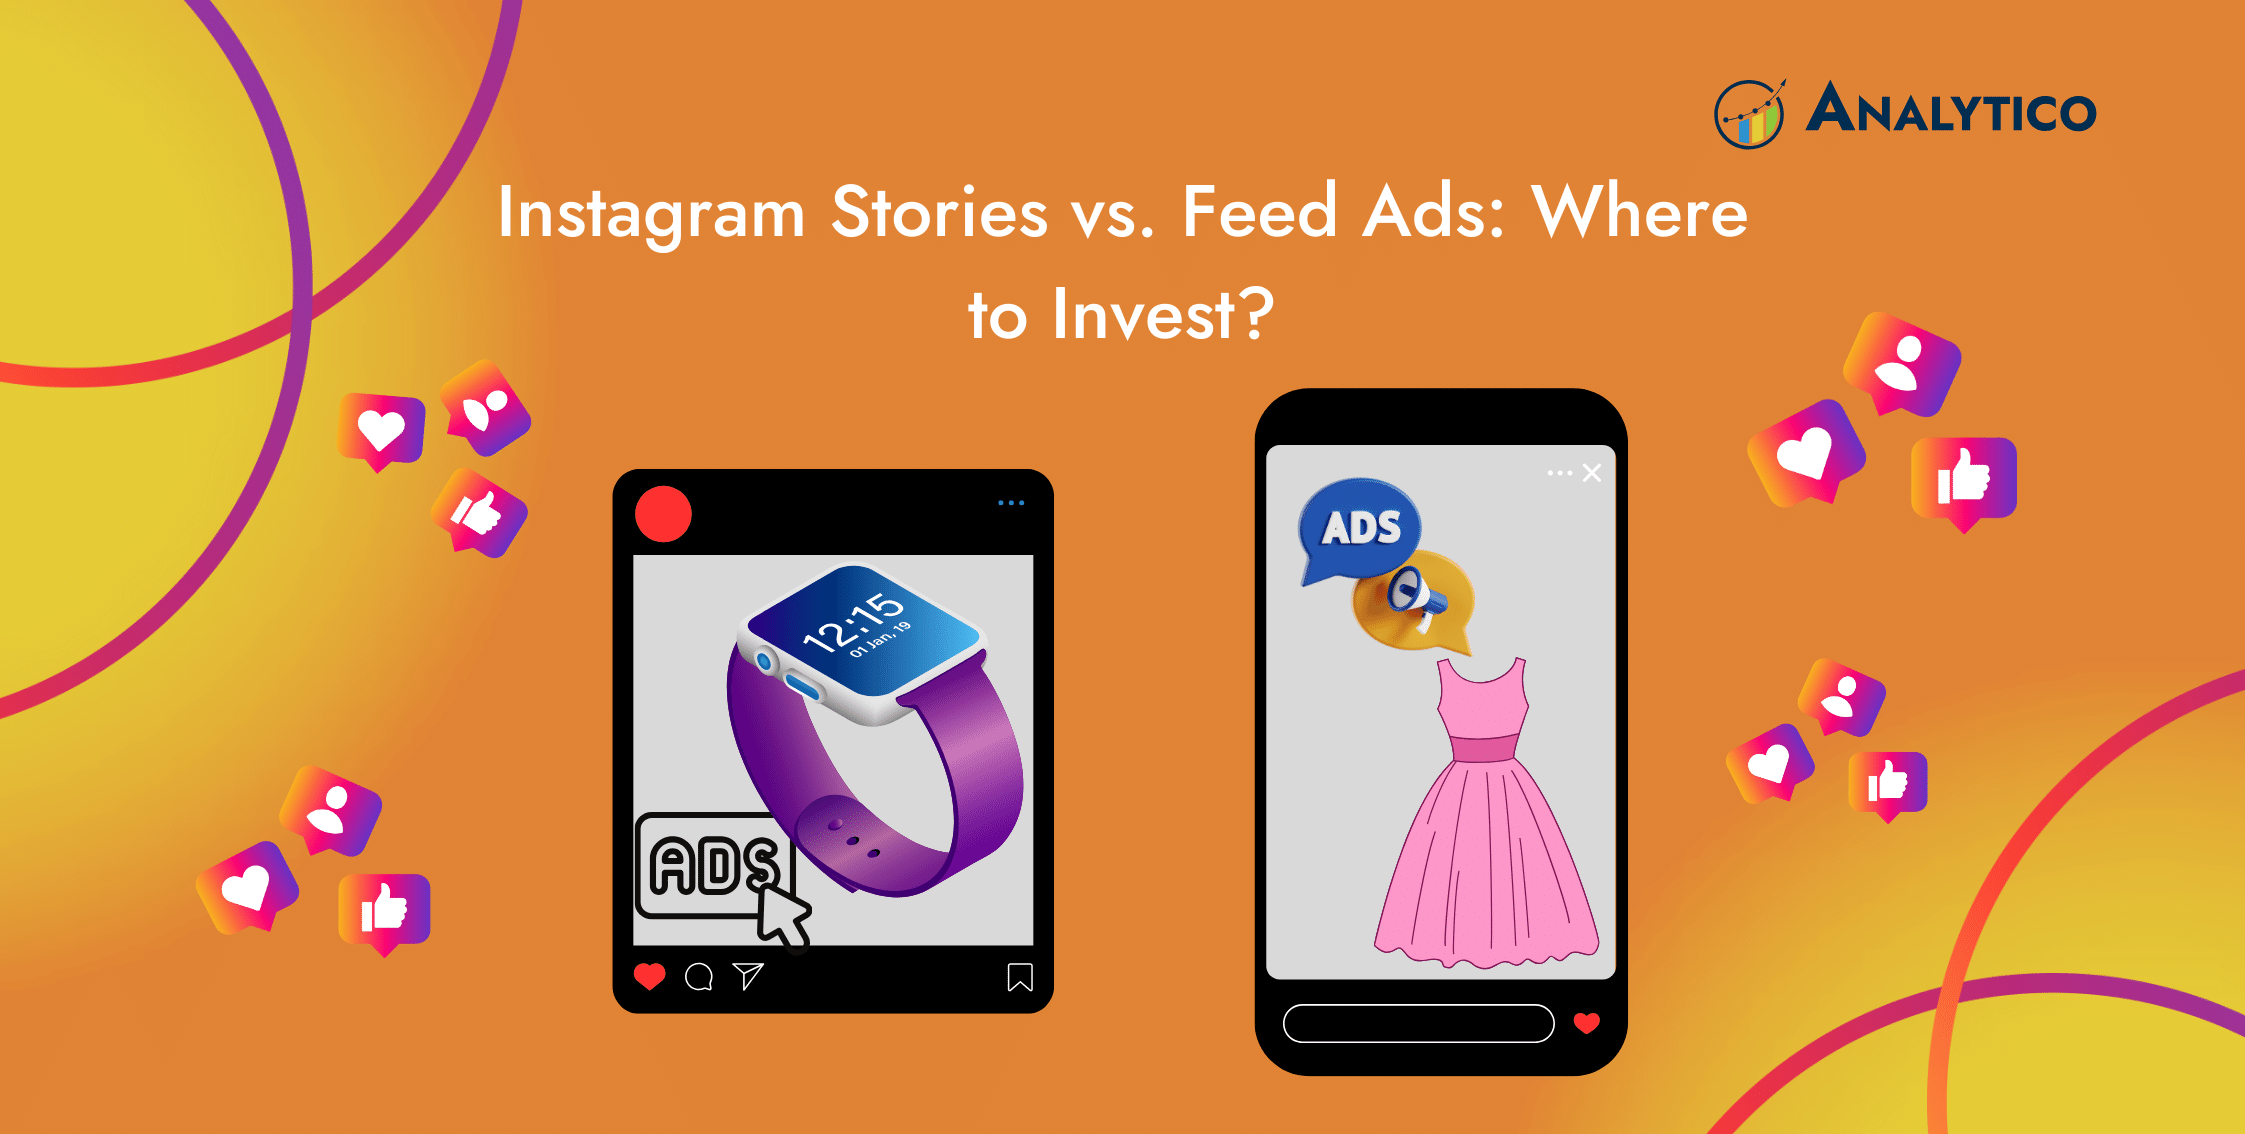 Instagram Stories vs. Feed Ads: Where to Invest for Maximum Engagement